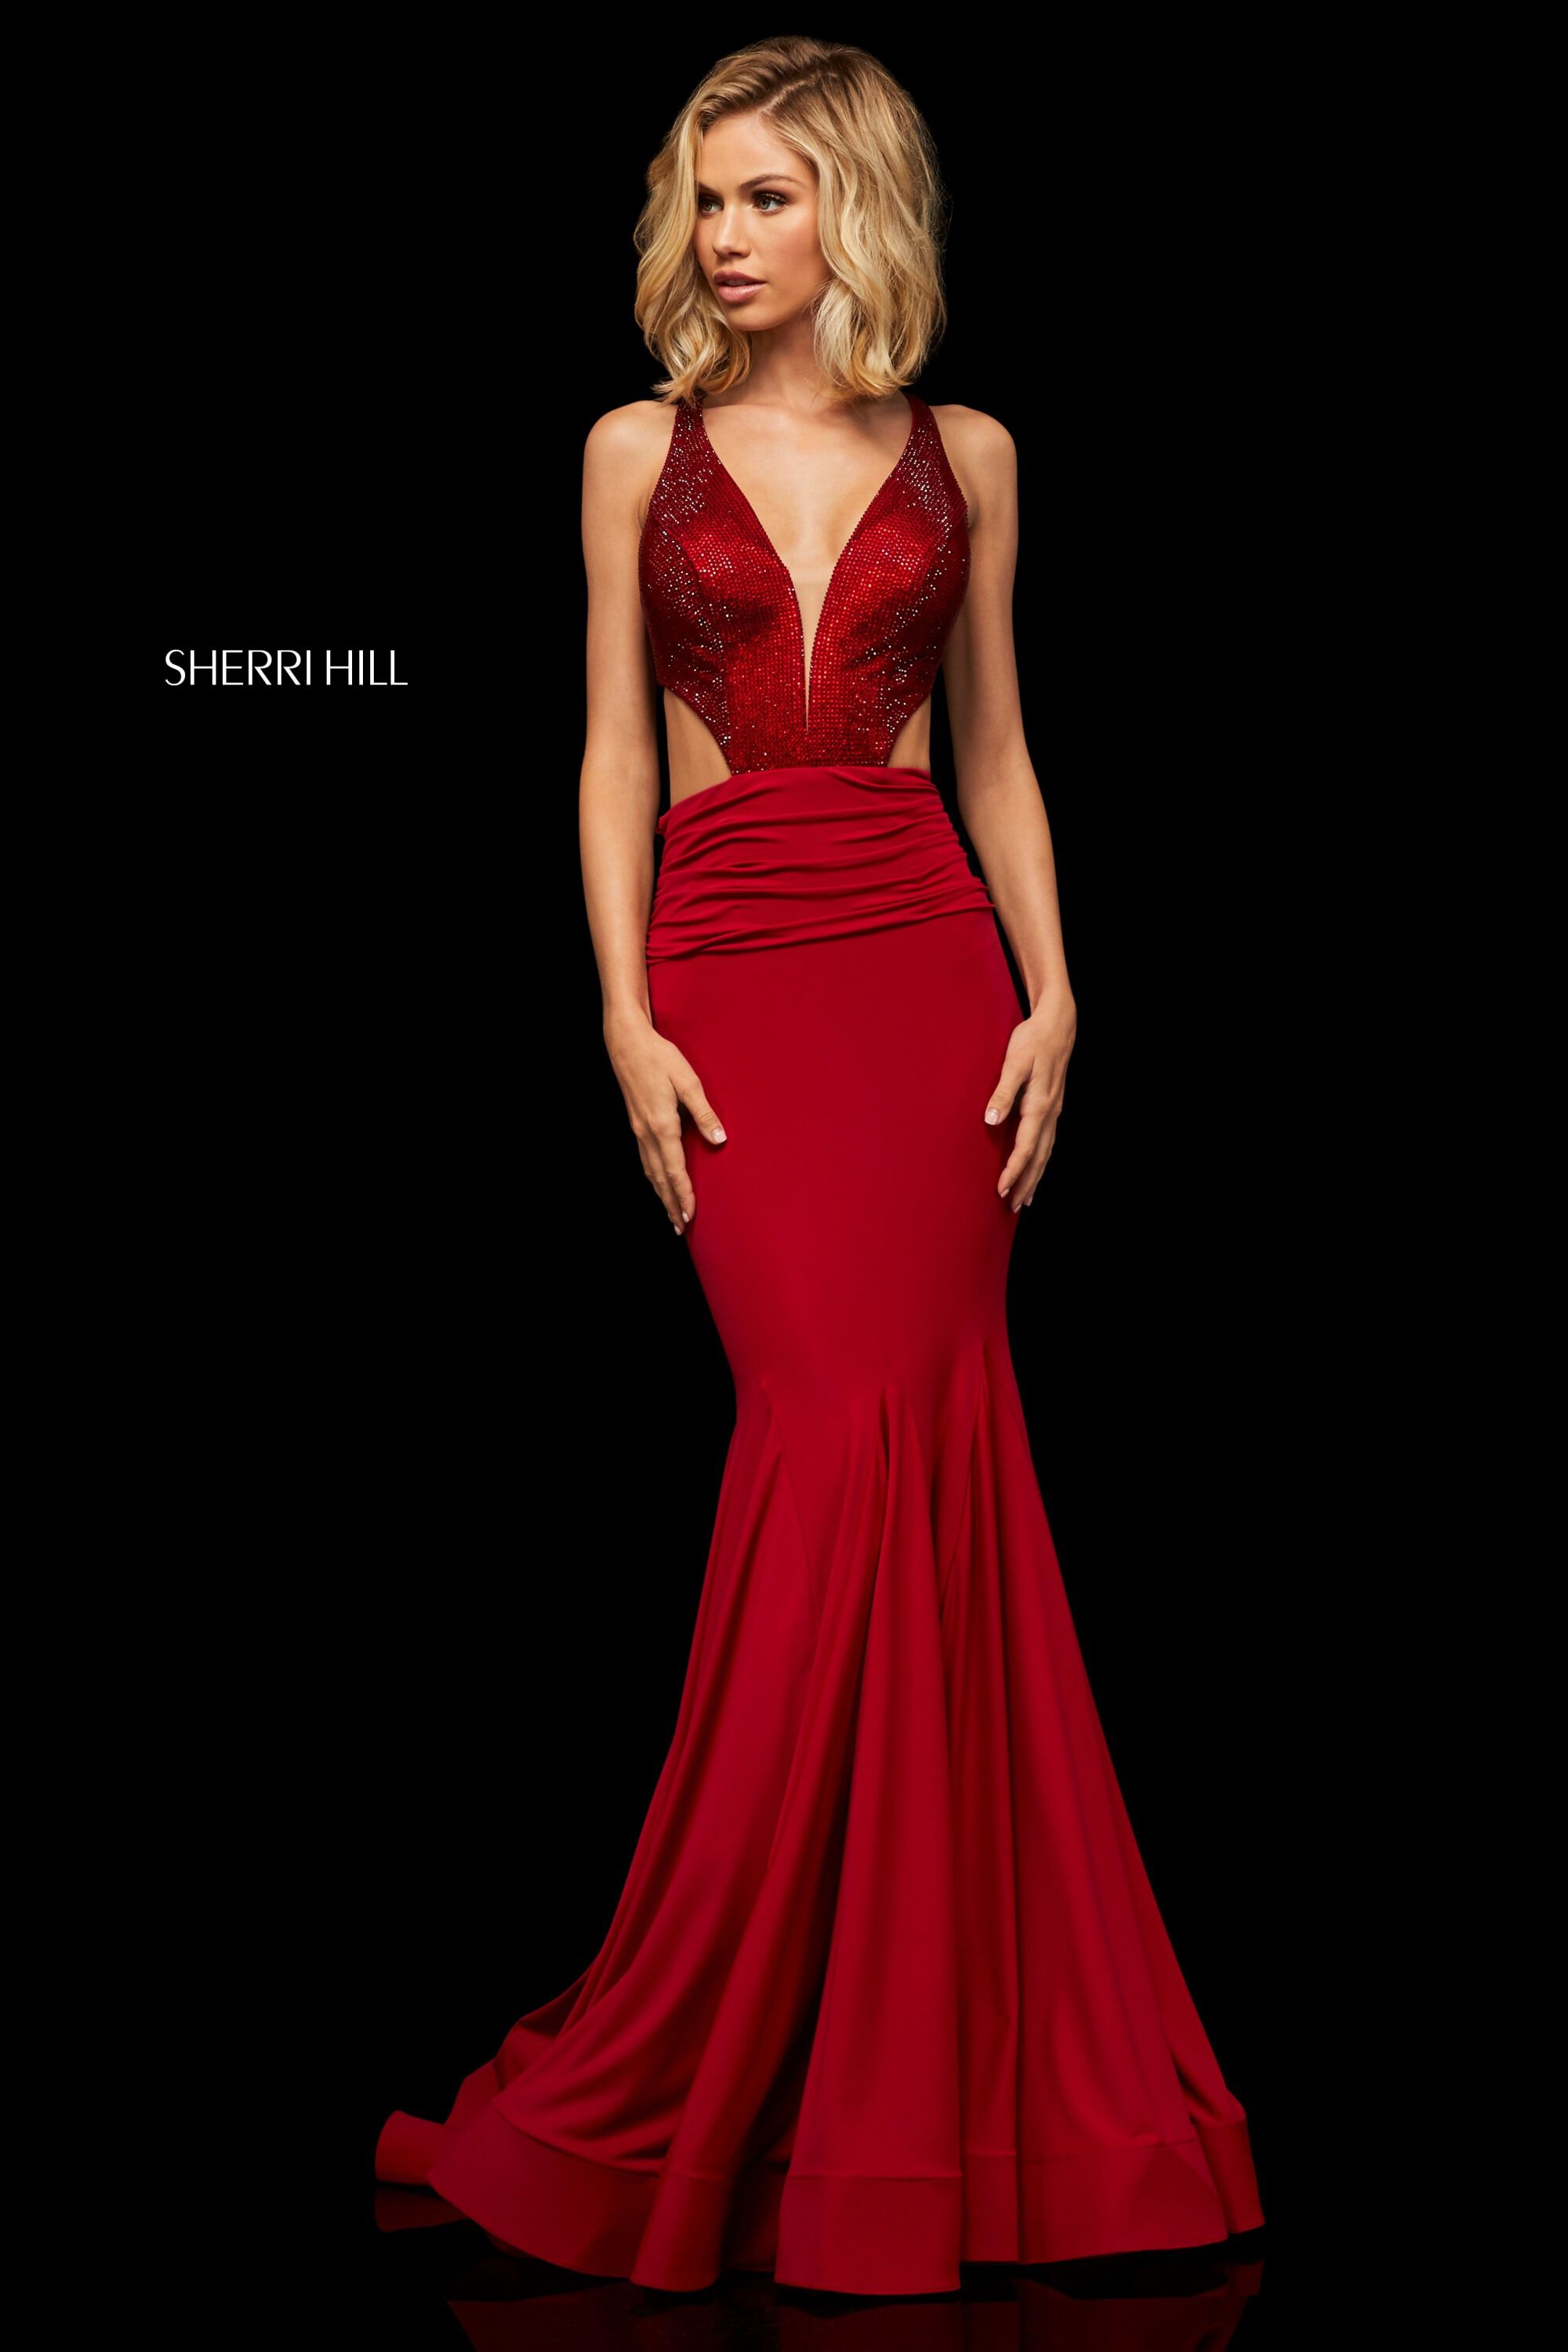 style № 52793 designed by SherriHill